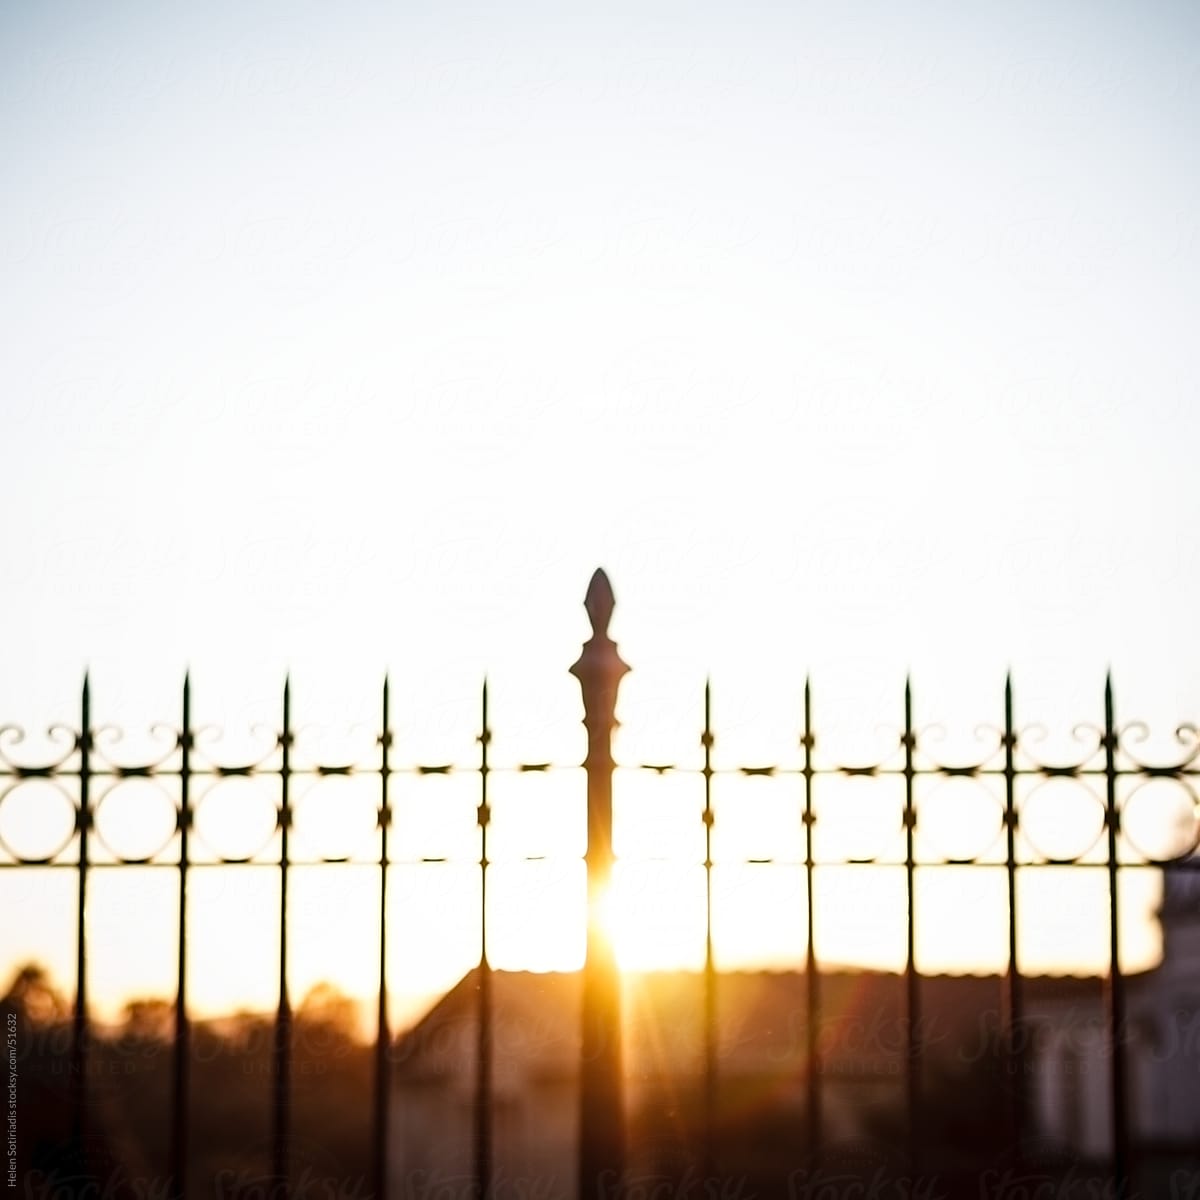 A fence that is backlit by the sun